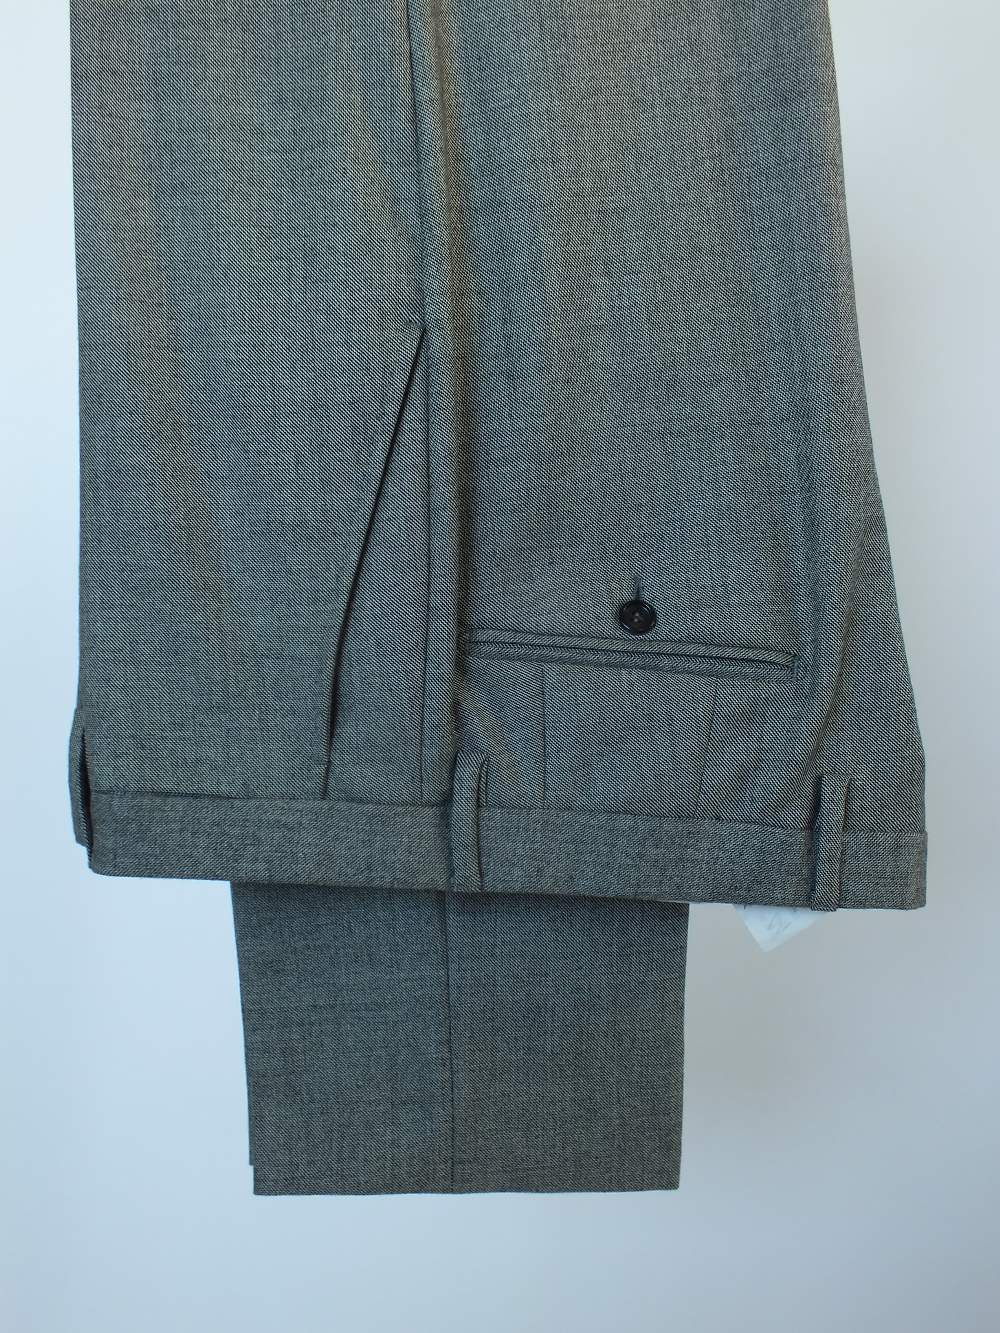 A Gucci suit, pale grey marl, double vent, 100% wool, Italian size 50R, flat front to trousers - Image 7 of 7